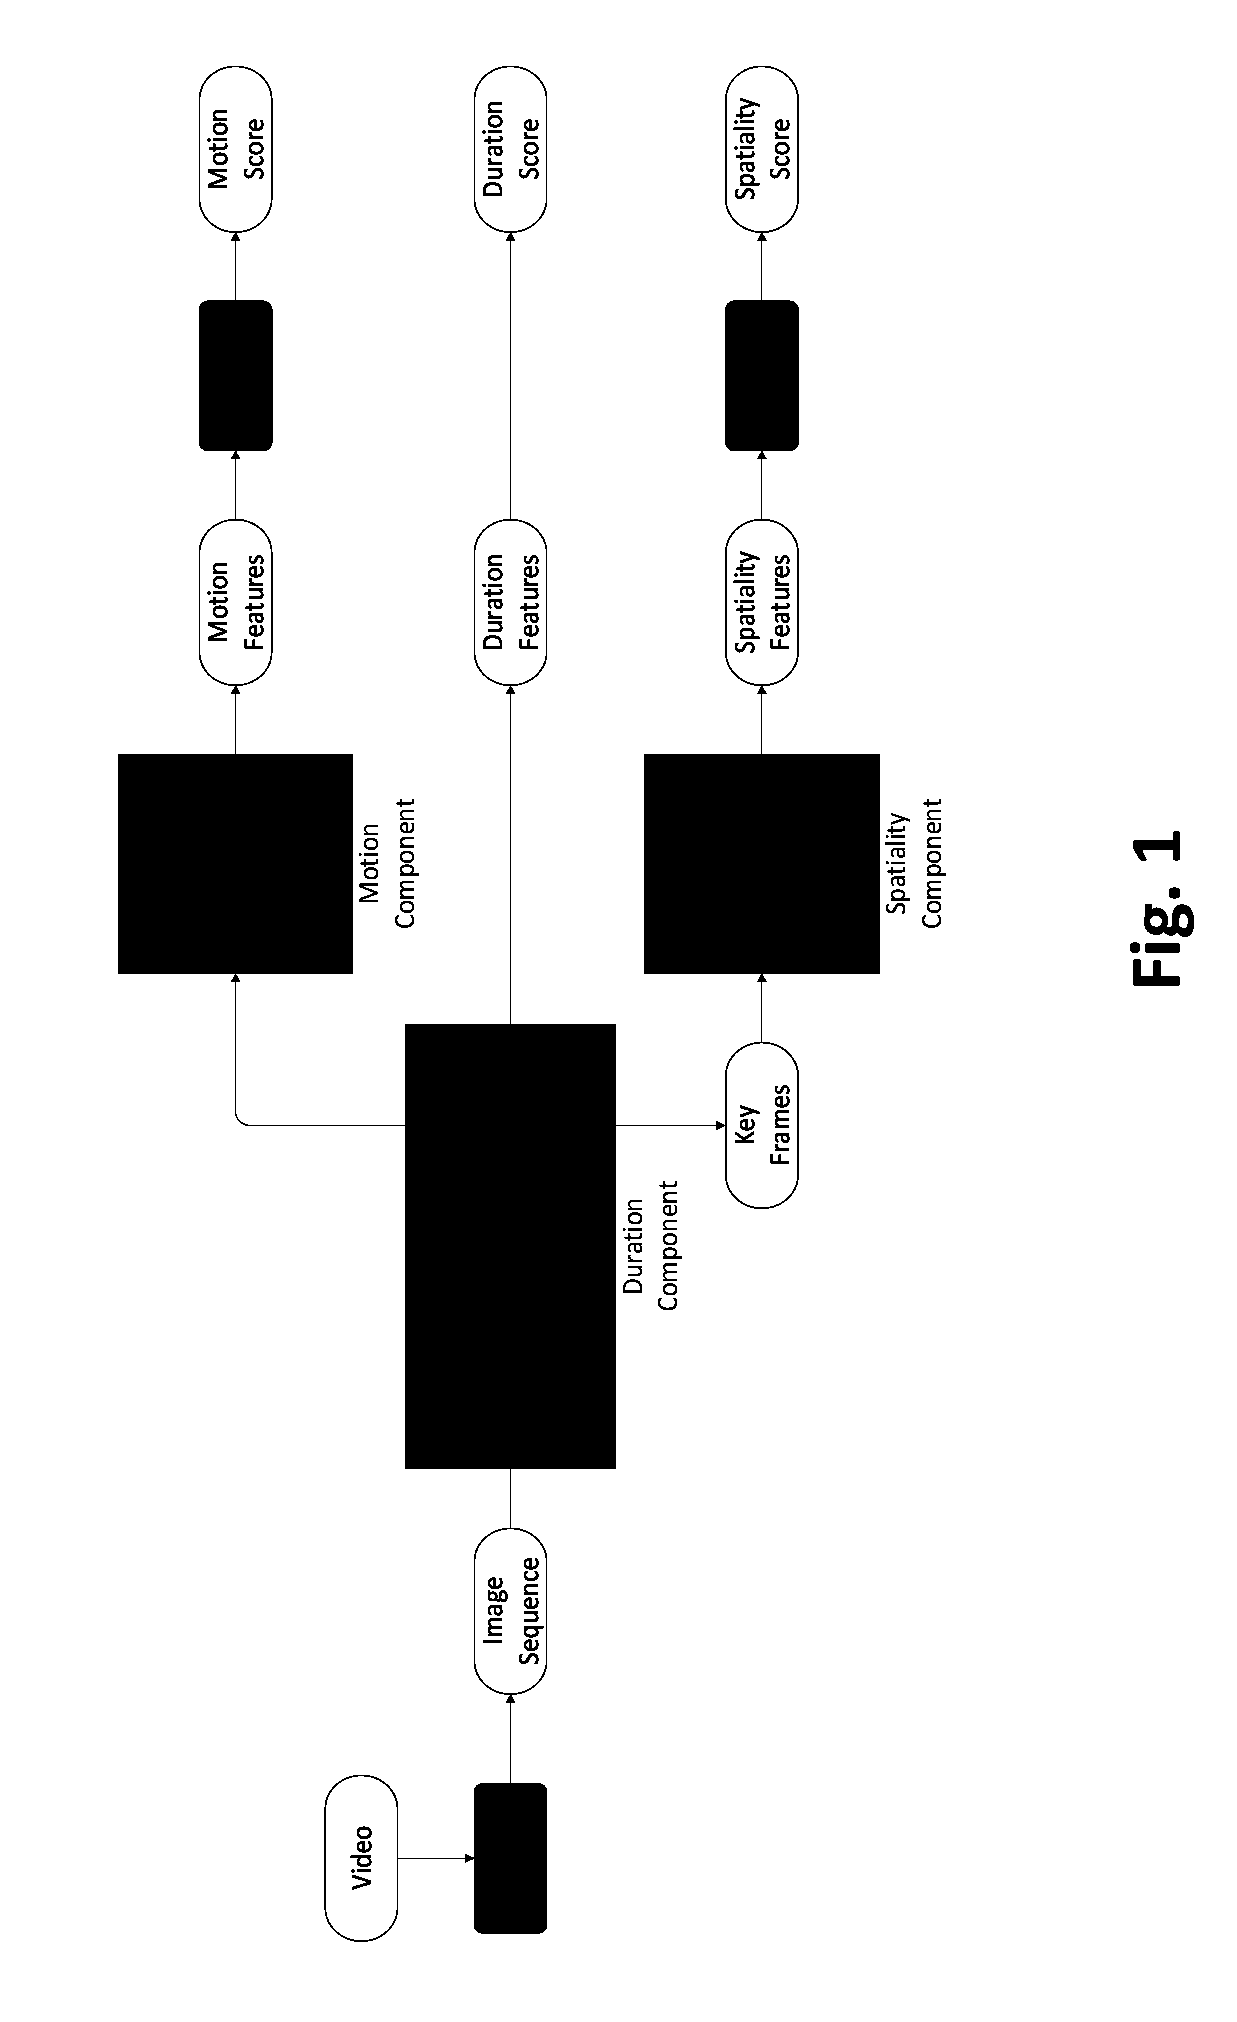 Computer Vision Based Method And System For Evaluating And Grading Surgical Procedures